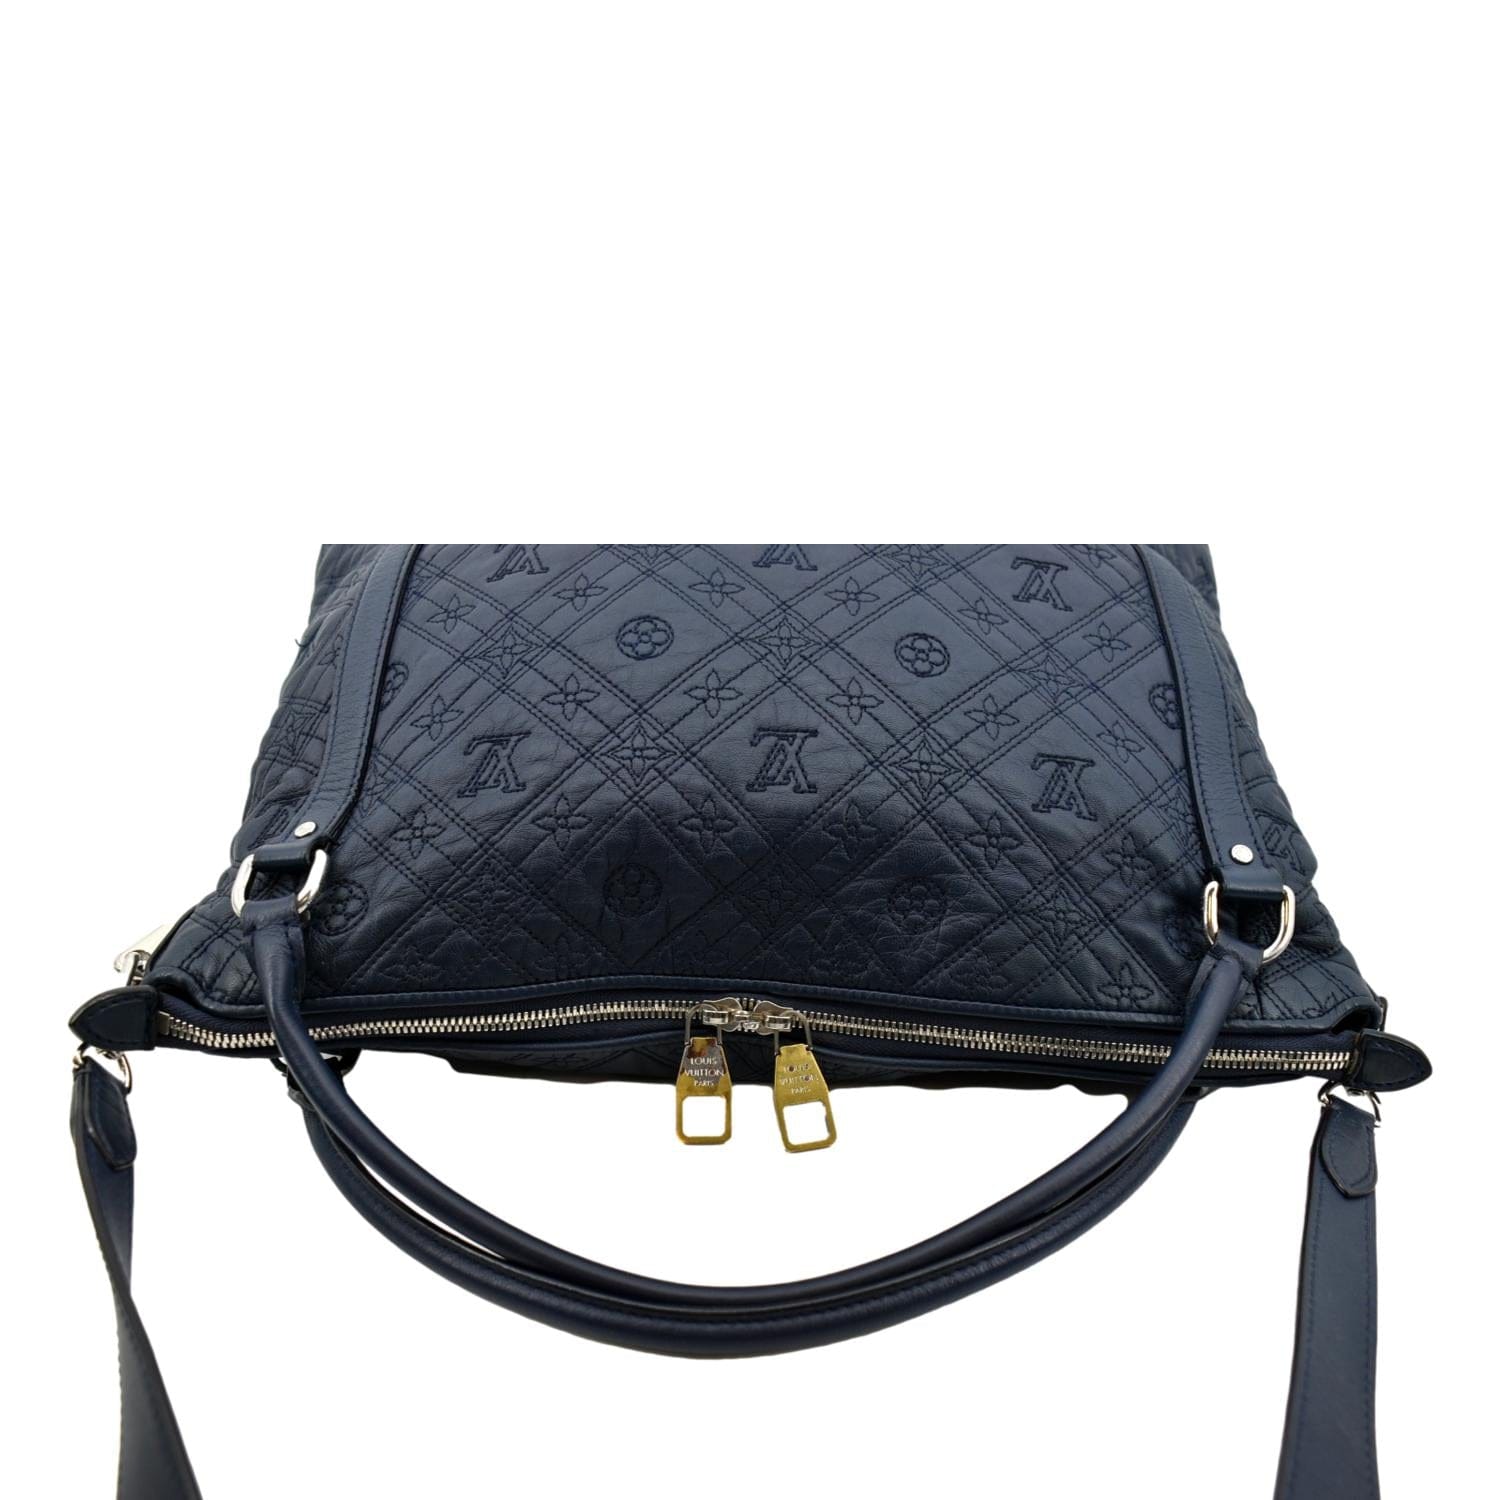 SOLD - LV Antheia Leather Ixia MM in Black Quilted Monogram